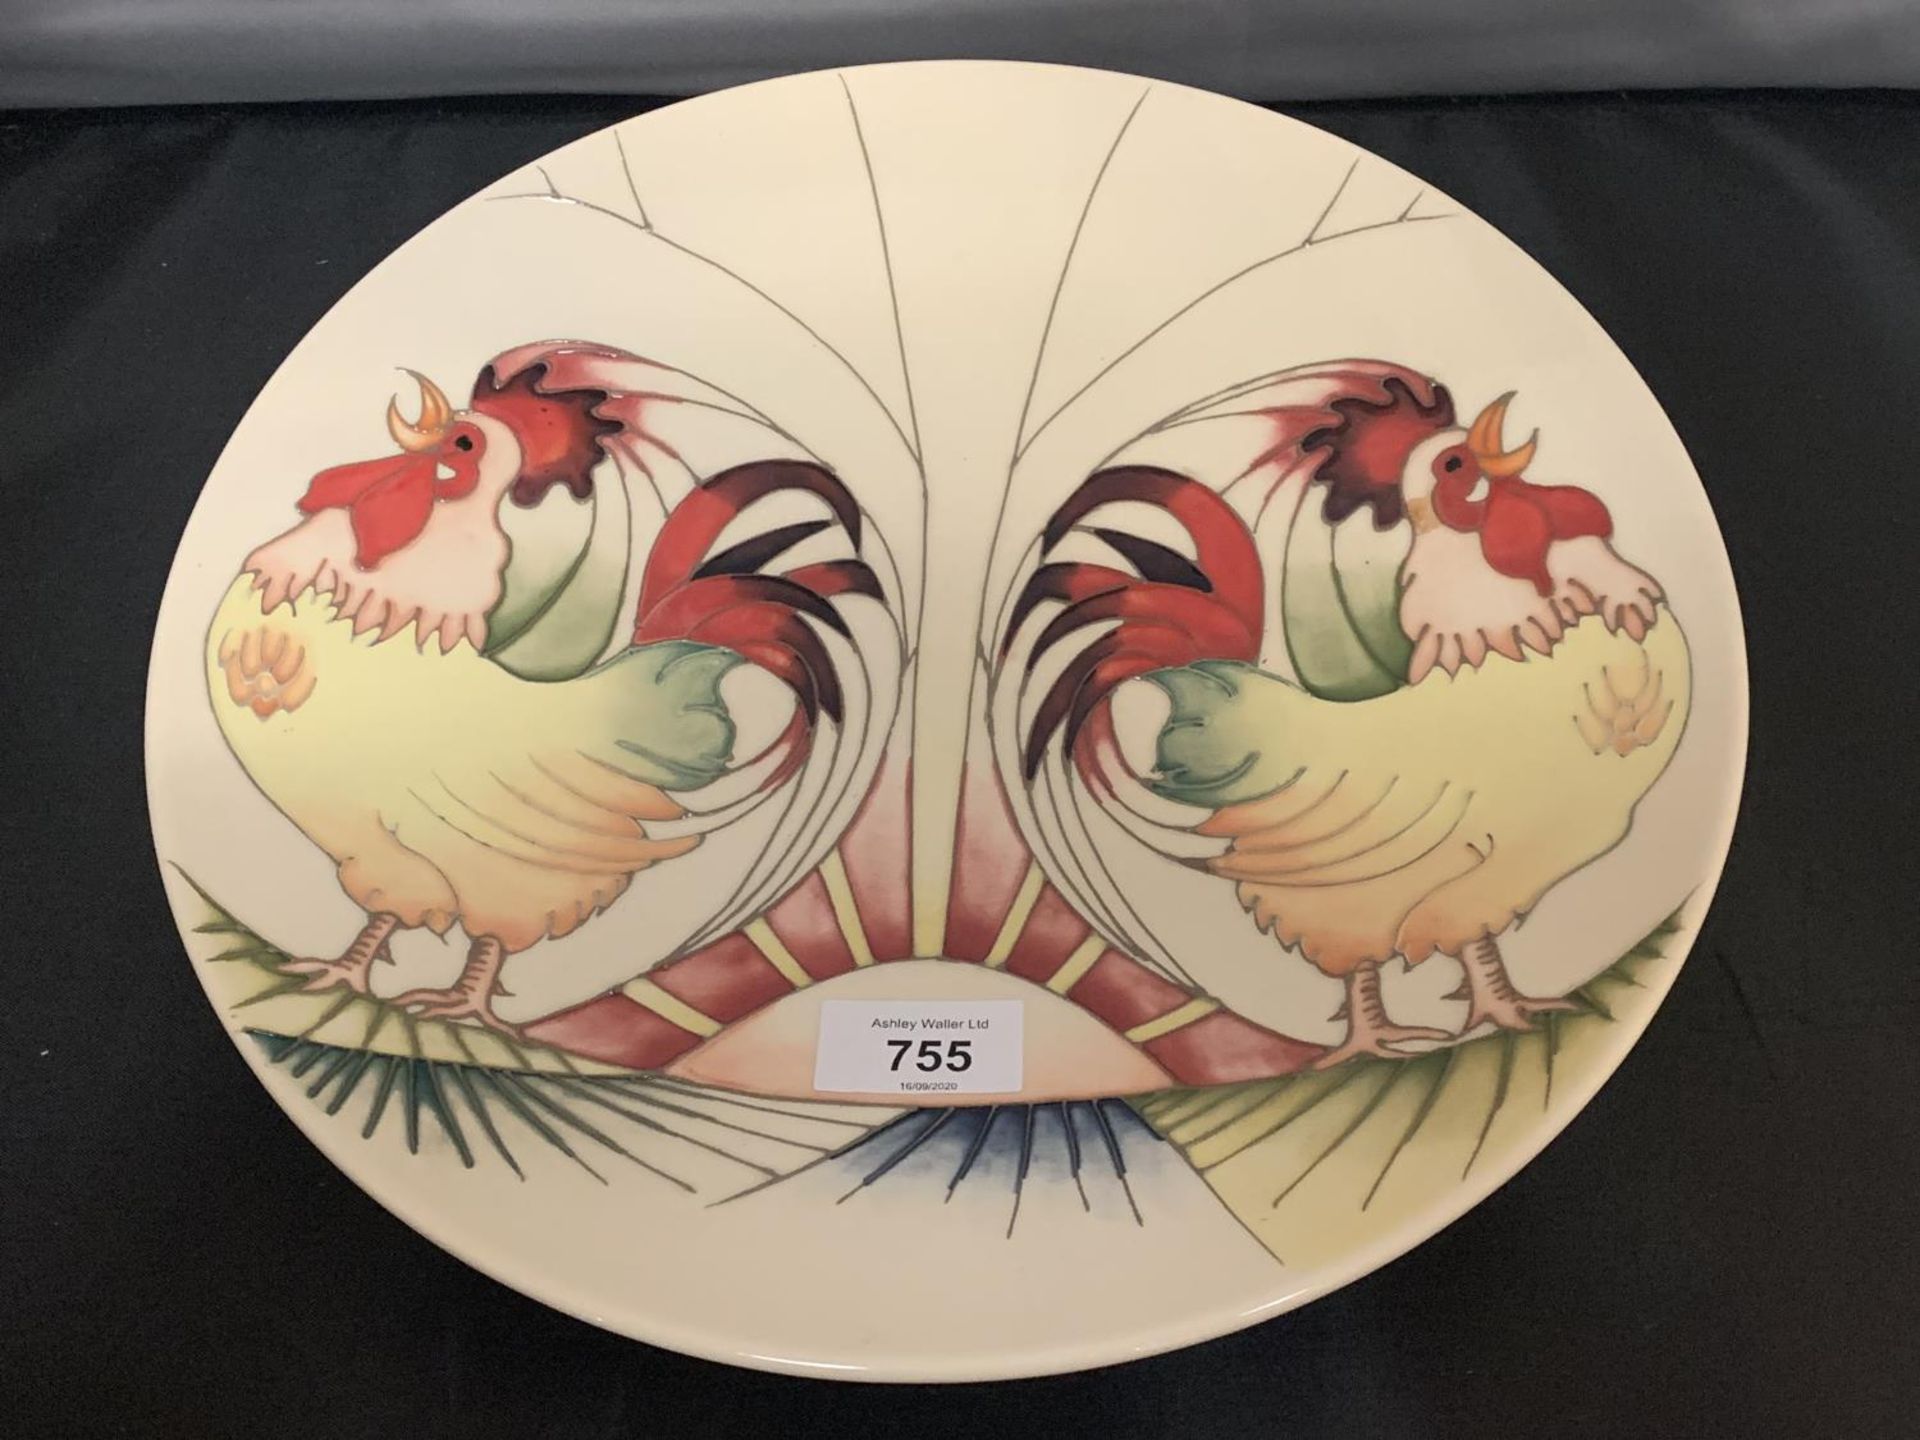 A MOORCROFT 12 INCH PLATE 'GOOD MORNING ROOSTERS'